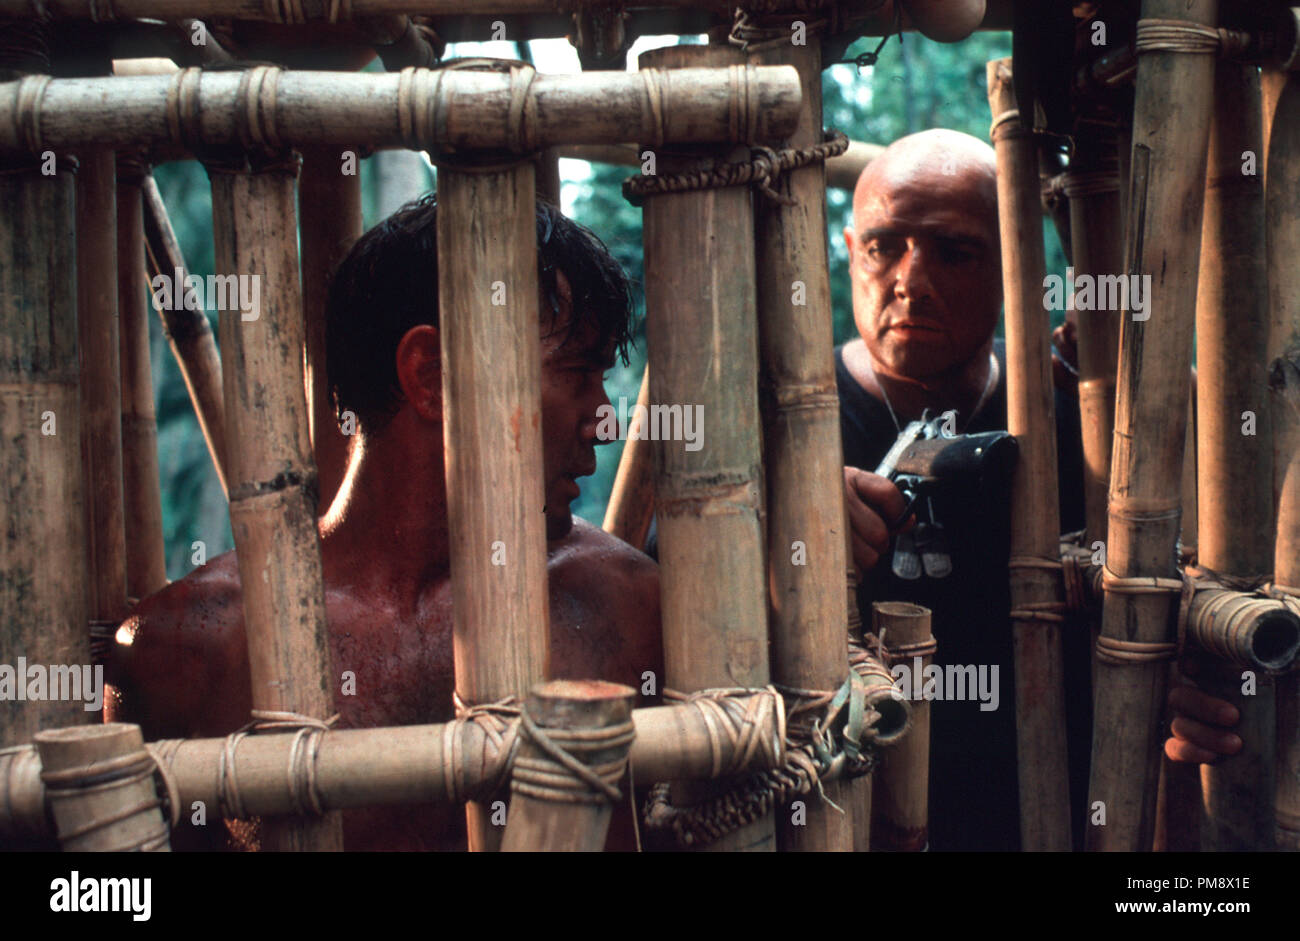 Studio Publicity Still from 'Apocalypse Now' Martin Sheen, Marlon Brando © 1979 United Artists  All Rights Reserved   File Reference # 31718152THA  For Editorial Use Only Stock Photo